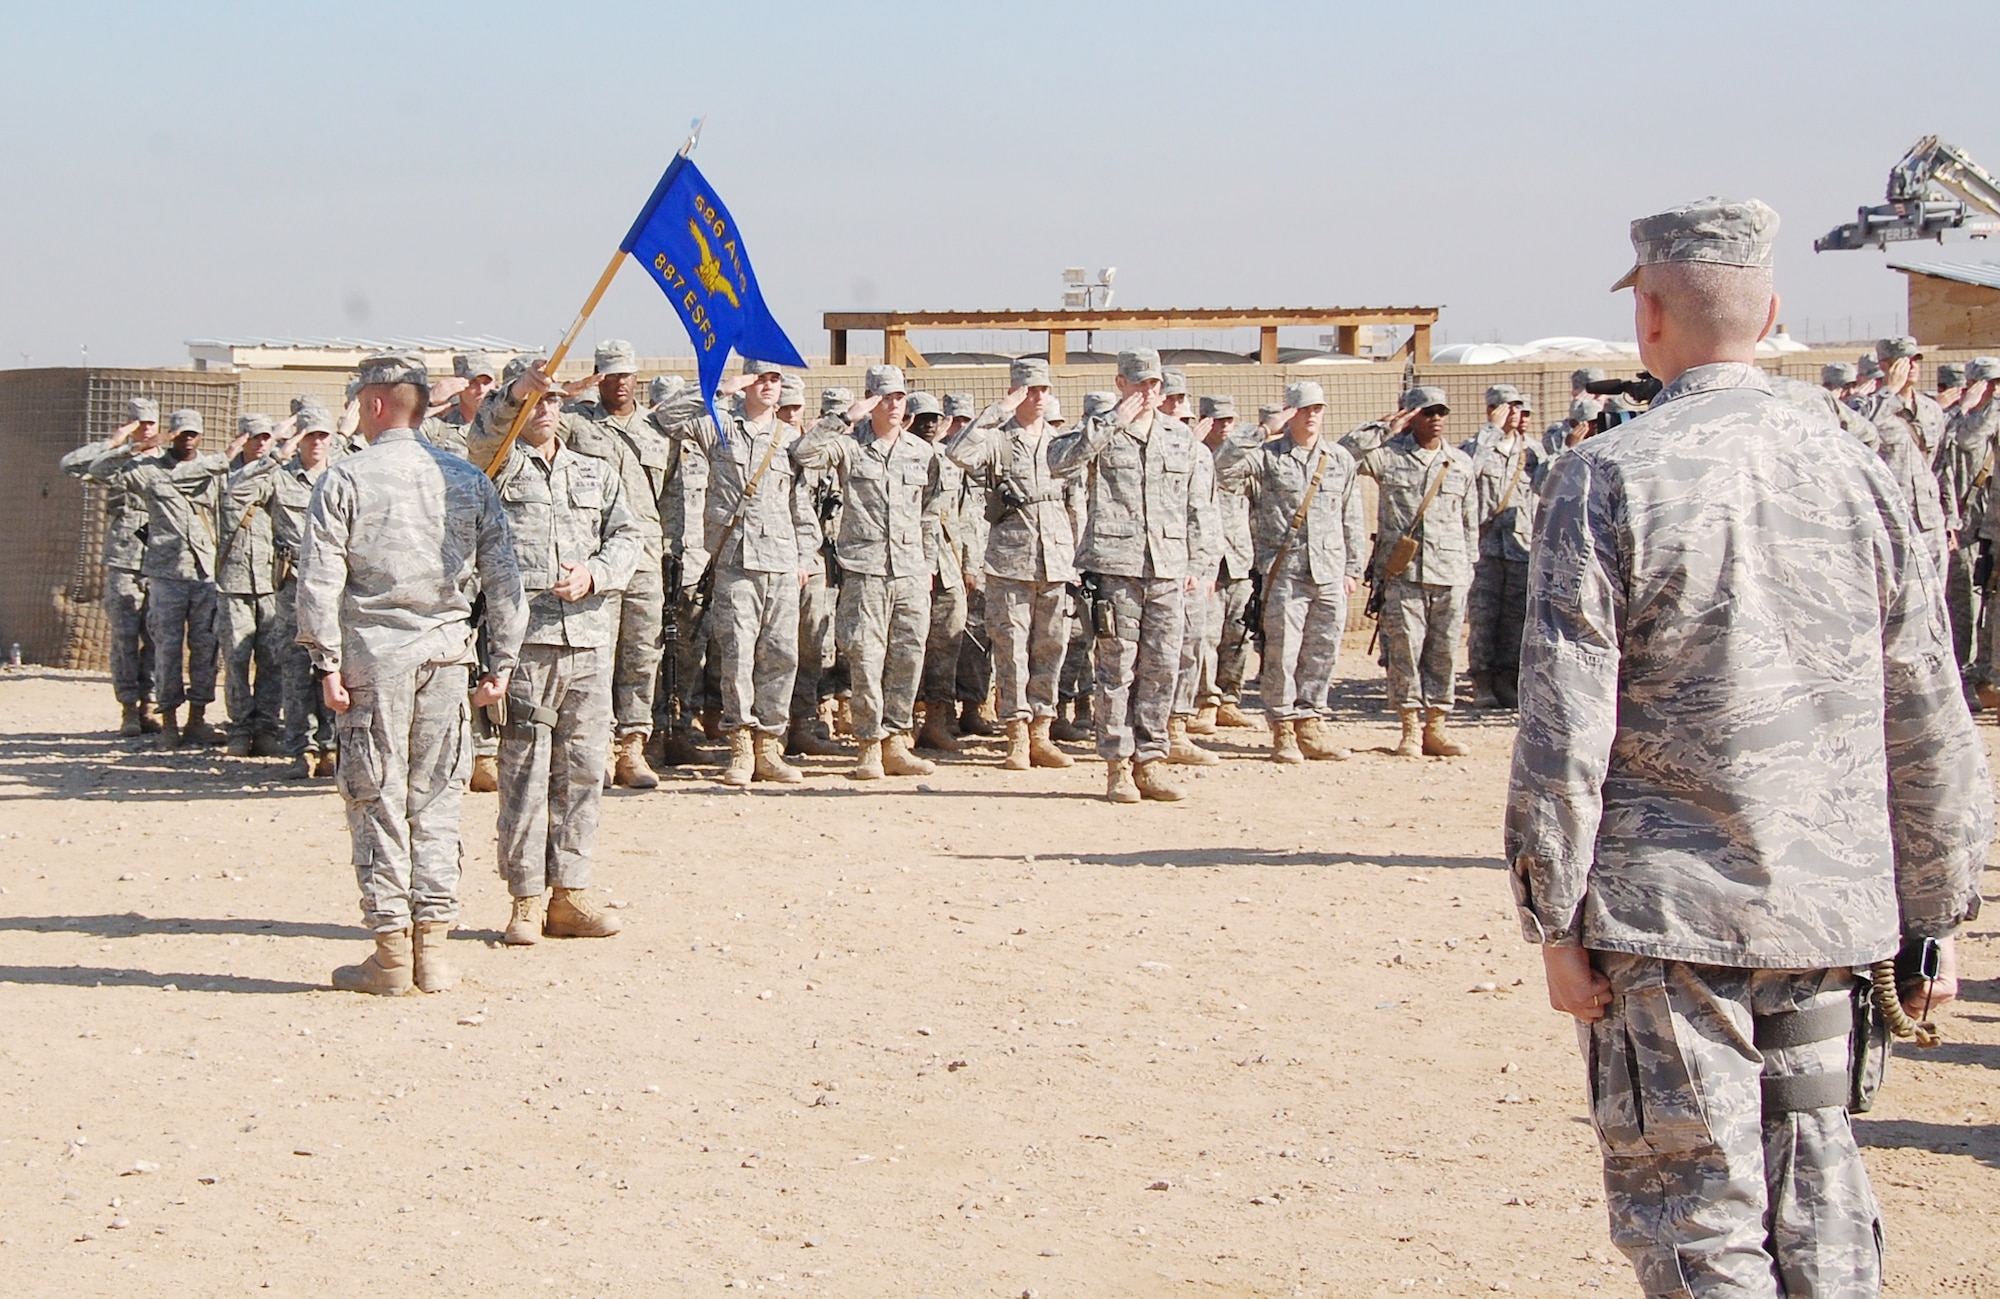 Members of the 887th Expeditionary Security Forces Squadron render their final salute to Maj. Larry Wood during the 887th ESFS deactivation ceremony Dec. 3, 2009 at Camp Bucca, Iraq. Major Wood is the 887th ESFS commander. (U.S. Air Force photo/Staff Sgt. Shaun Emery)